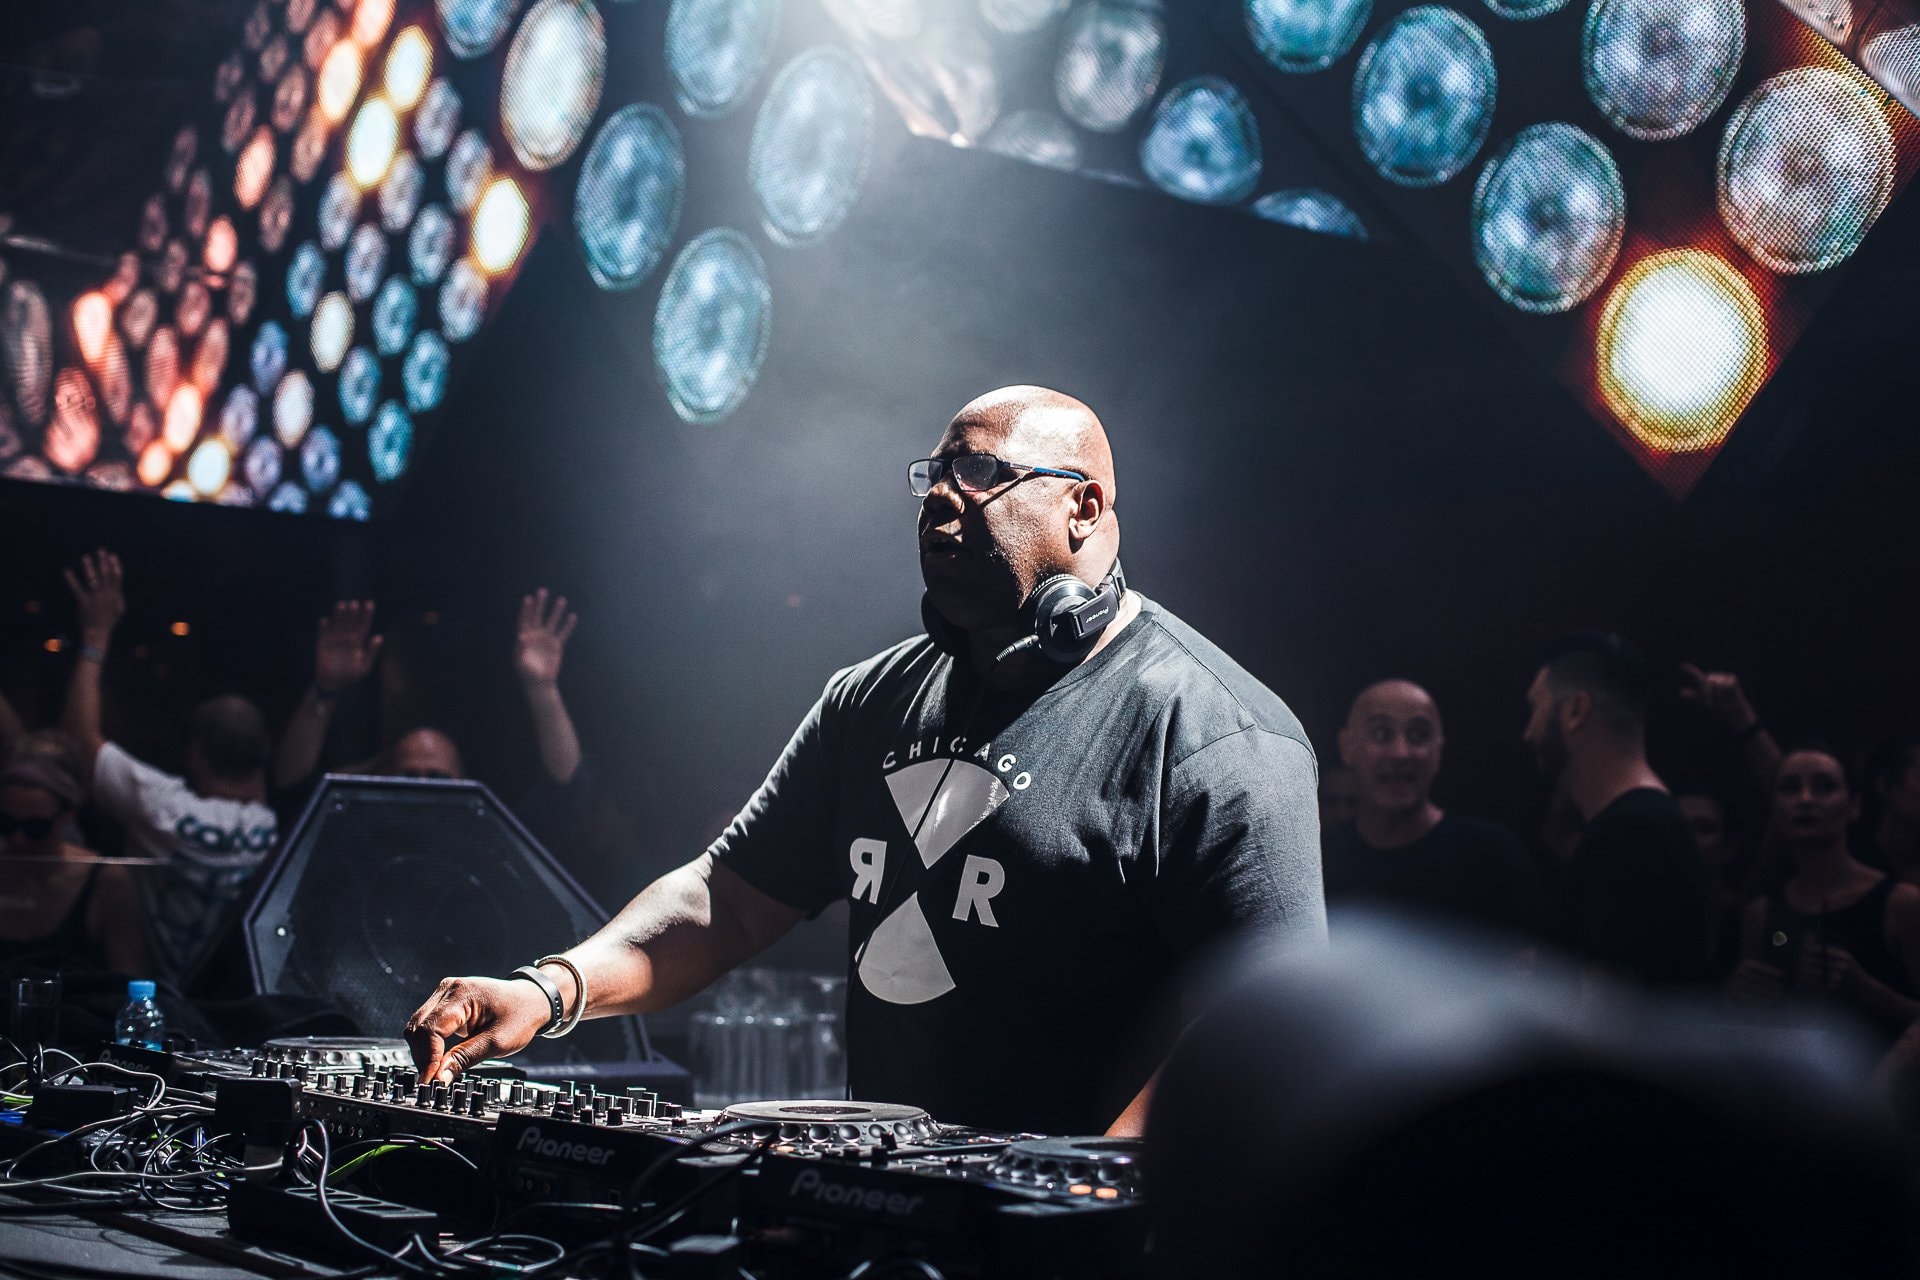 Get Some Images about the Legendary DJ Carl Cox Who is going to Mix in Tomorrowland